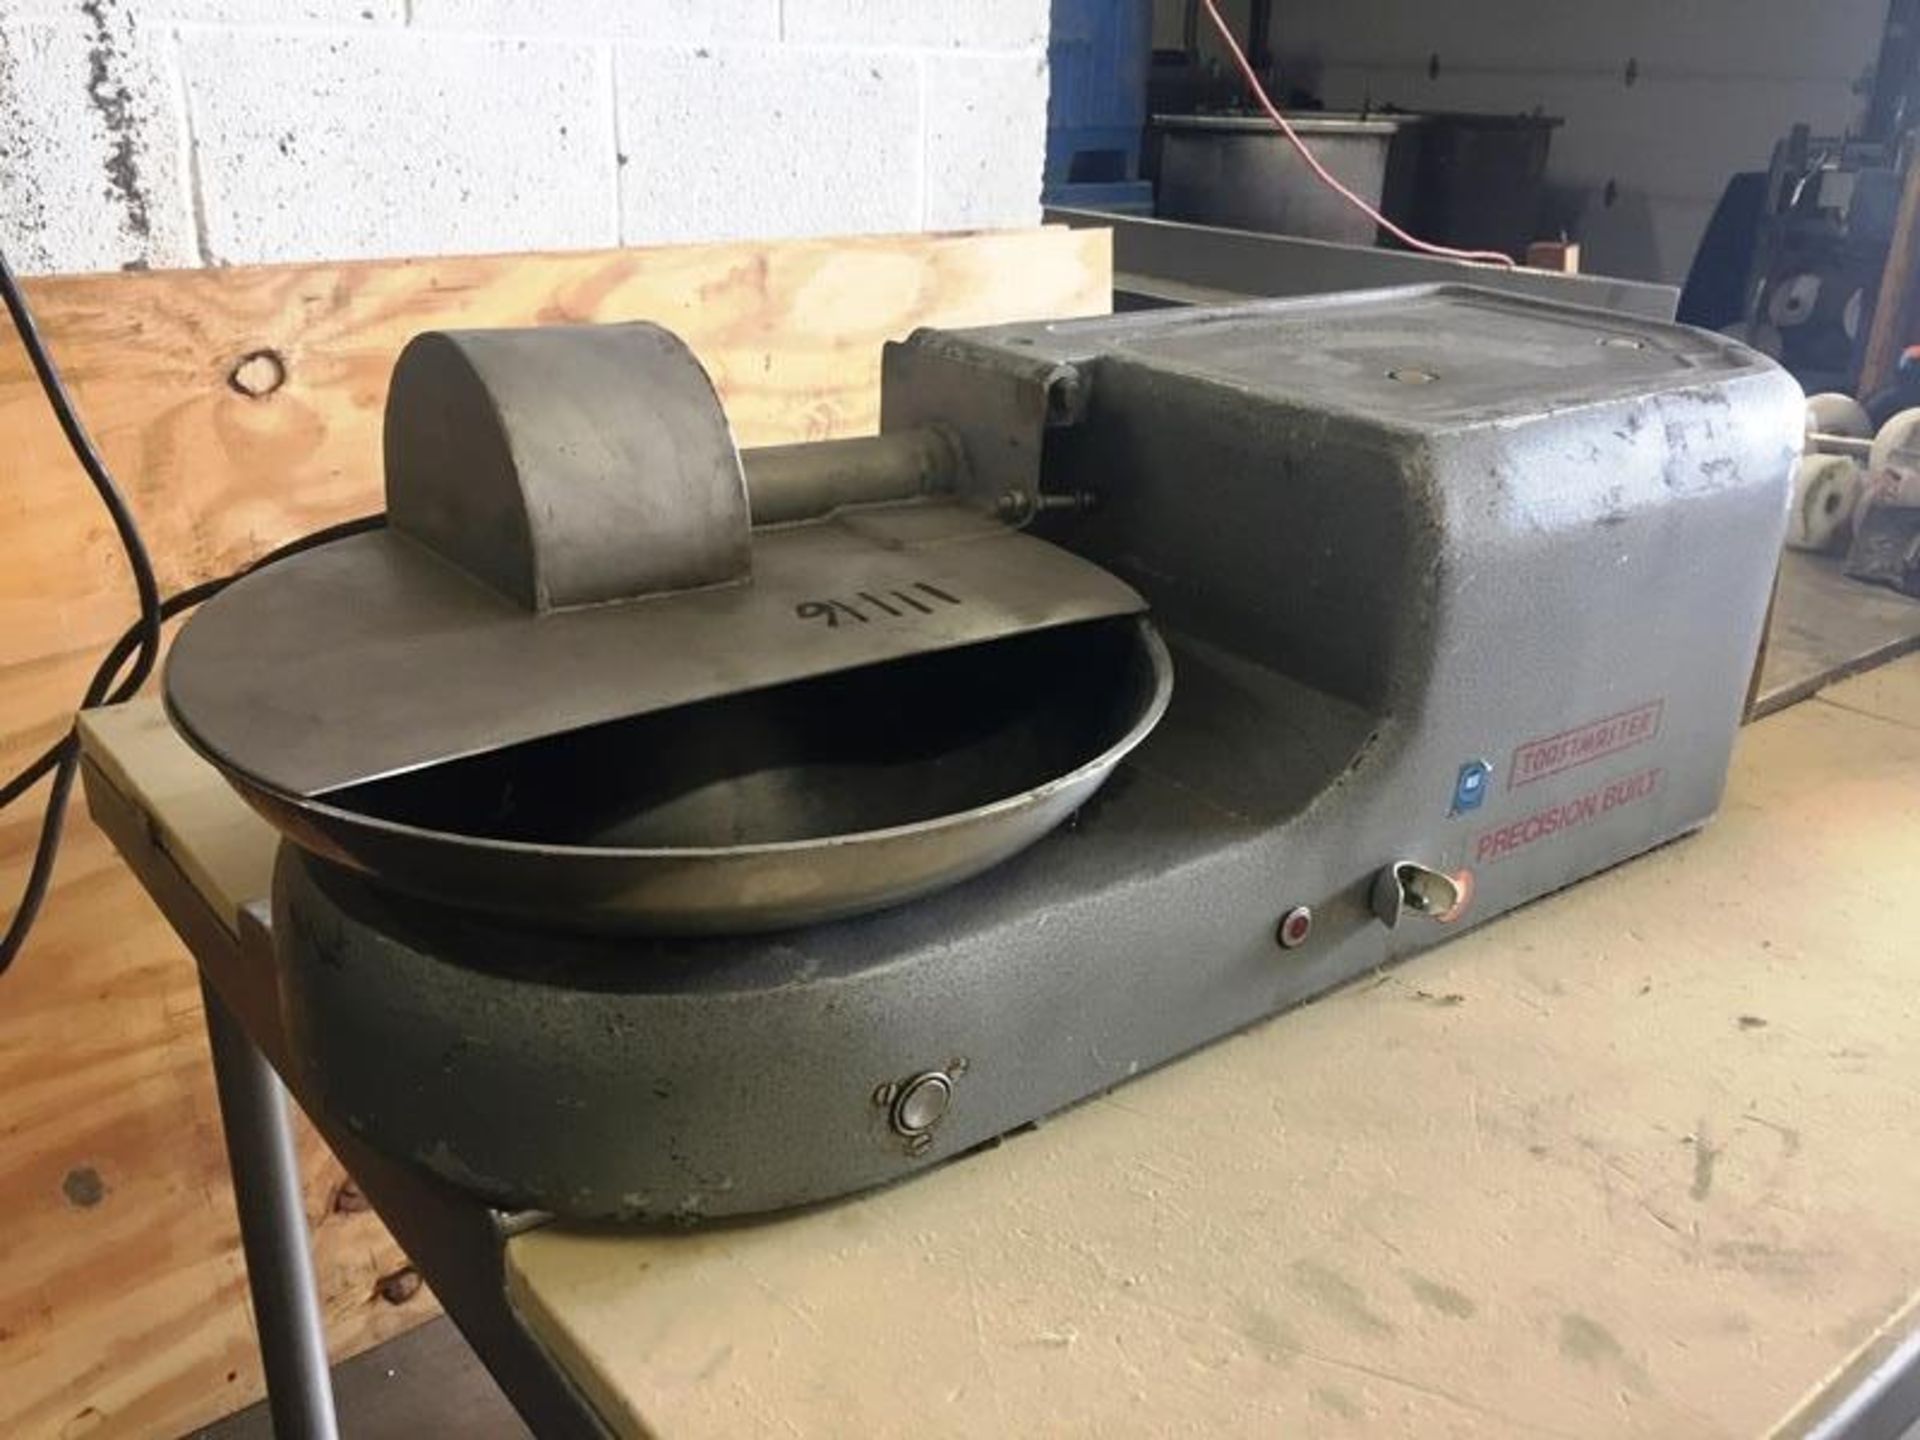 Toastmaster Bowl Chopper, 14 1/2" bowl dia., 2 blades, 110 volts, runs good ***All Monies must be re - Image 2 of 3